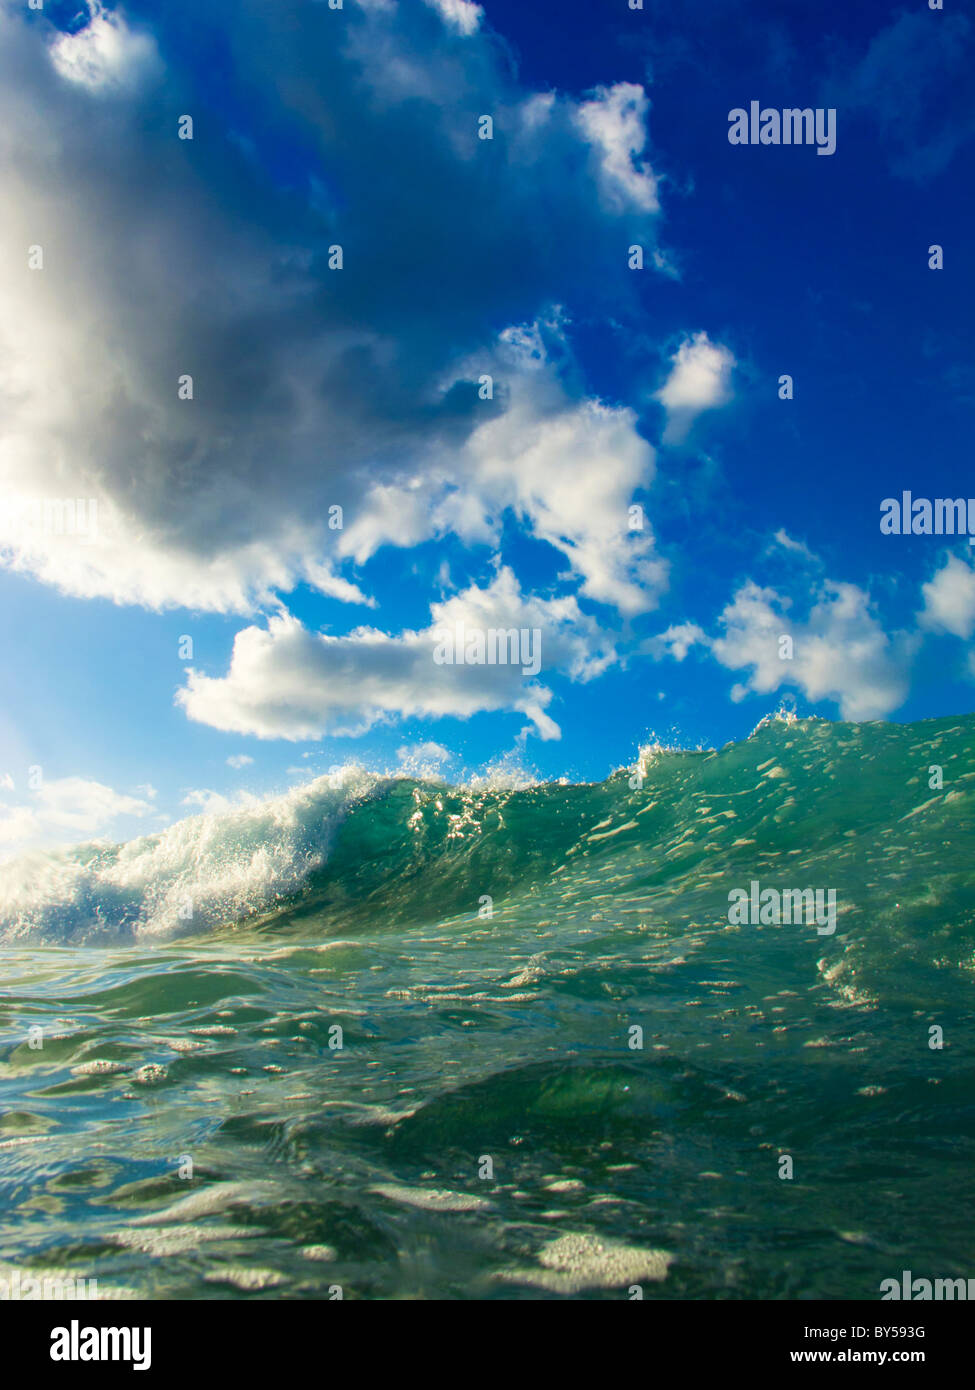 View of the sea with green water and blue, cloudy skies Stock Photo